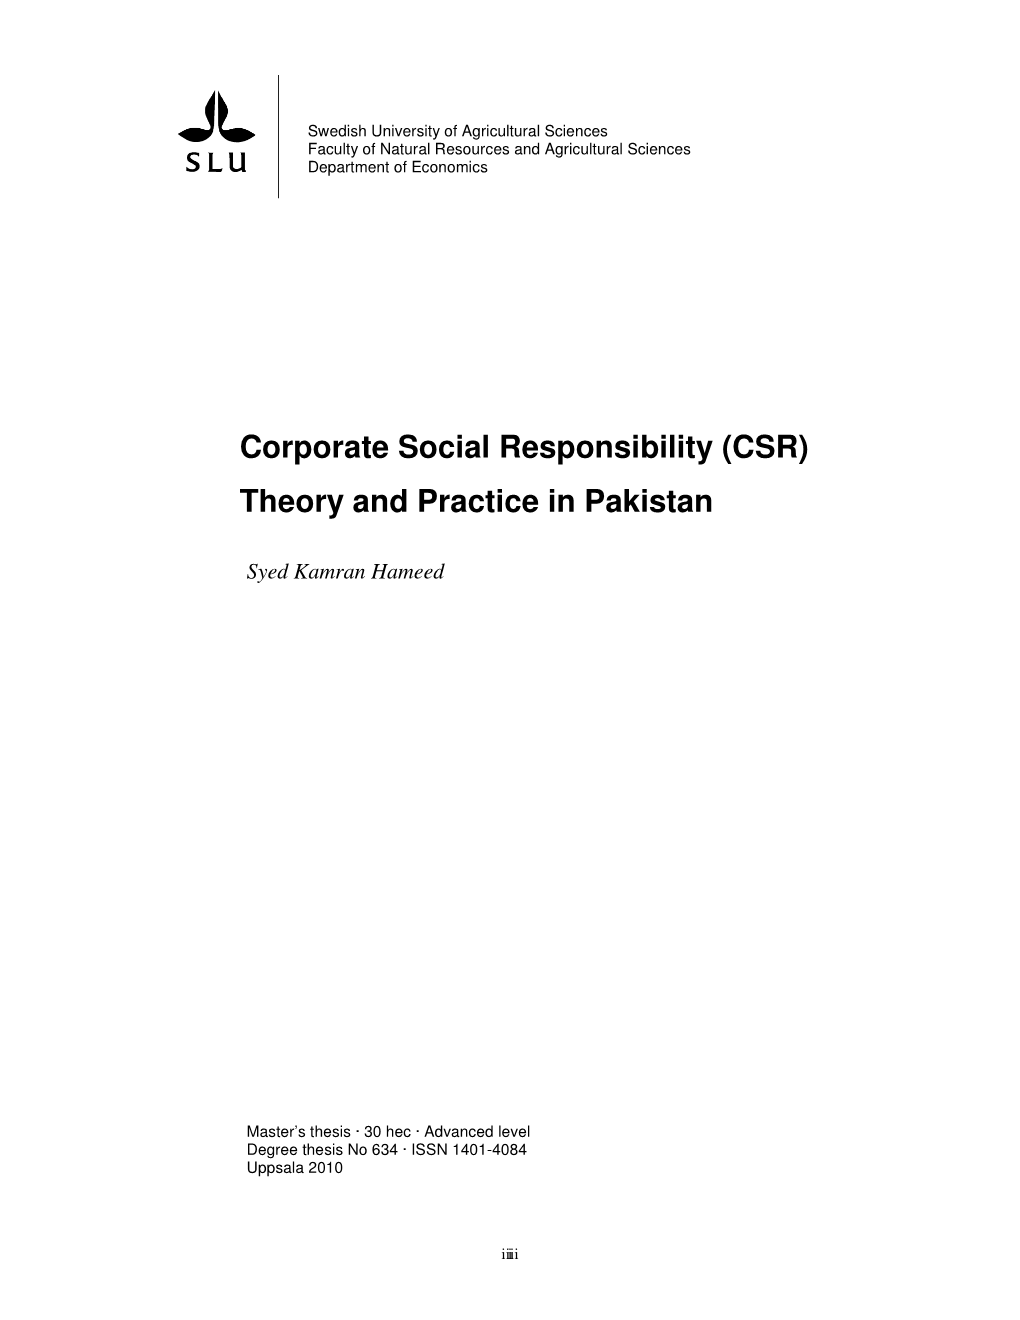 Corporate Social Responsibility (CSR) Theory and Practice in Pakistan